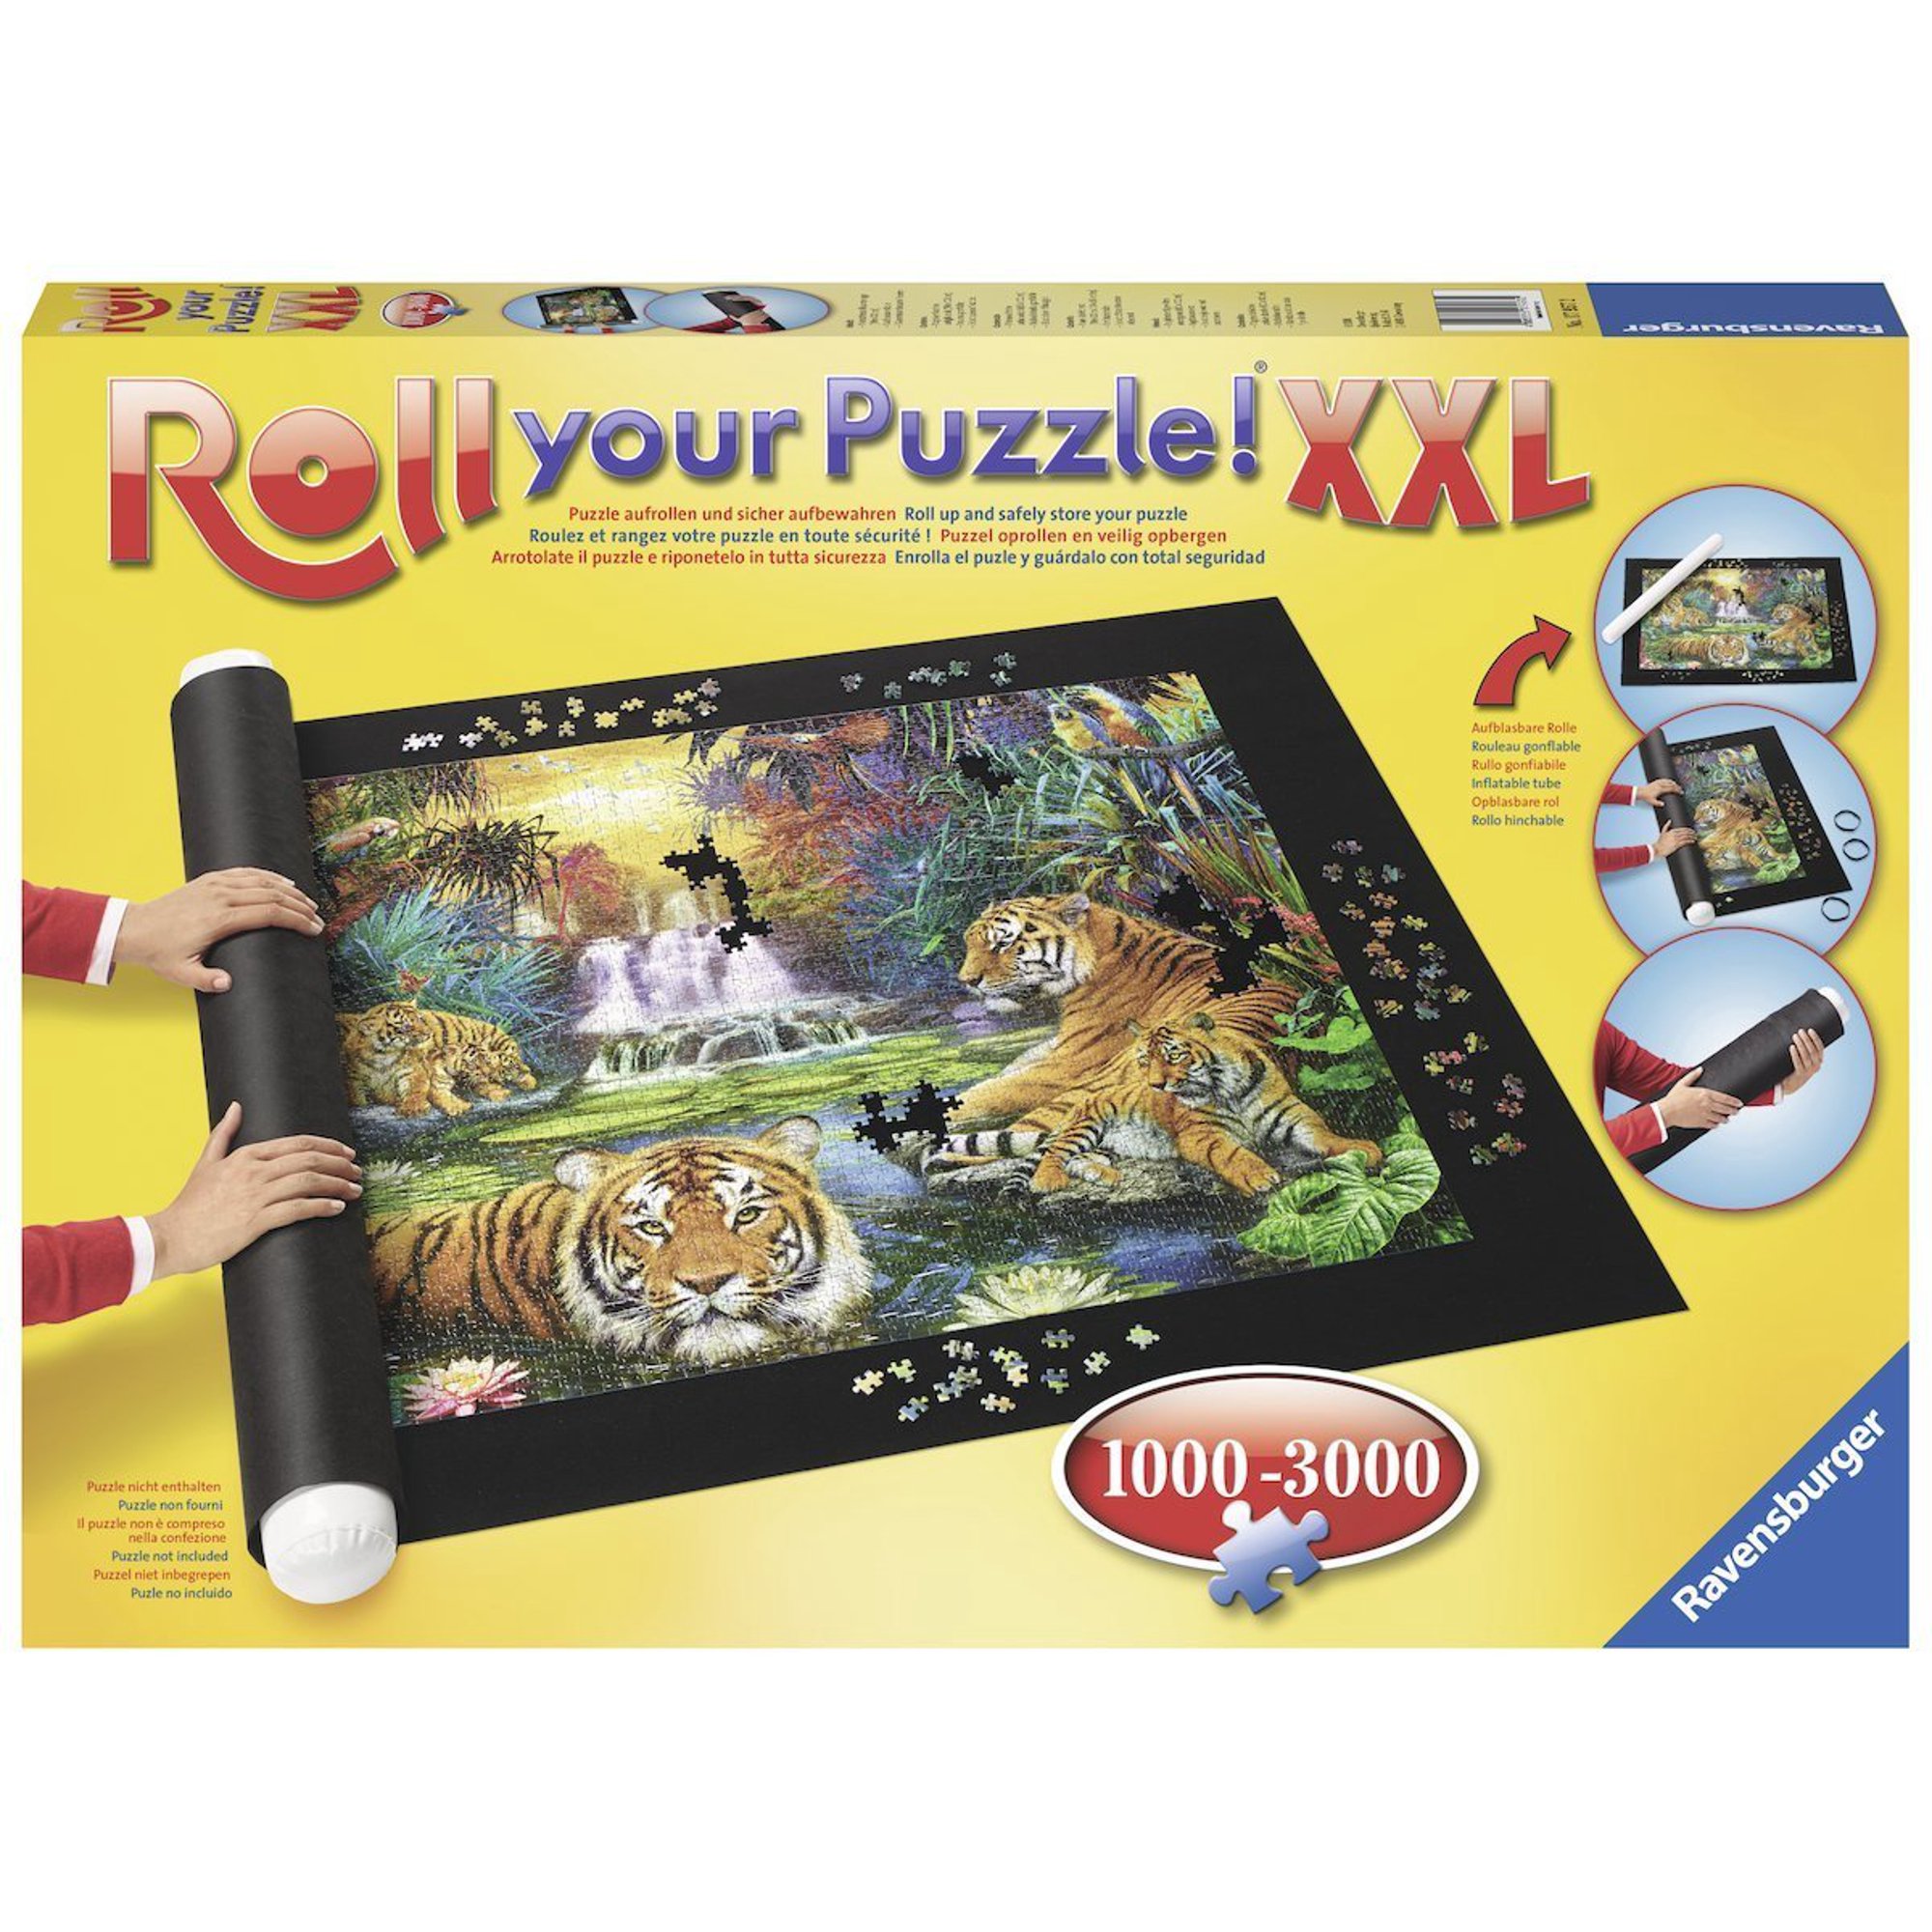 Ravensburger: Roll your Puzzle! XXL 